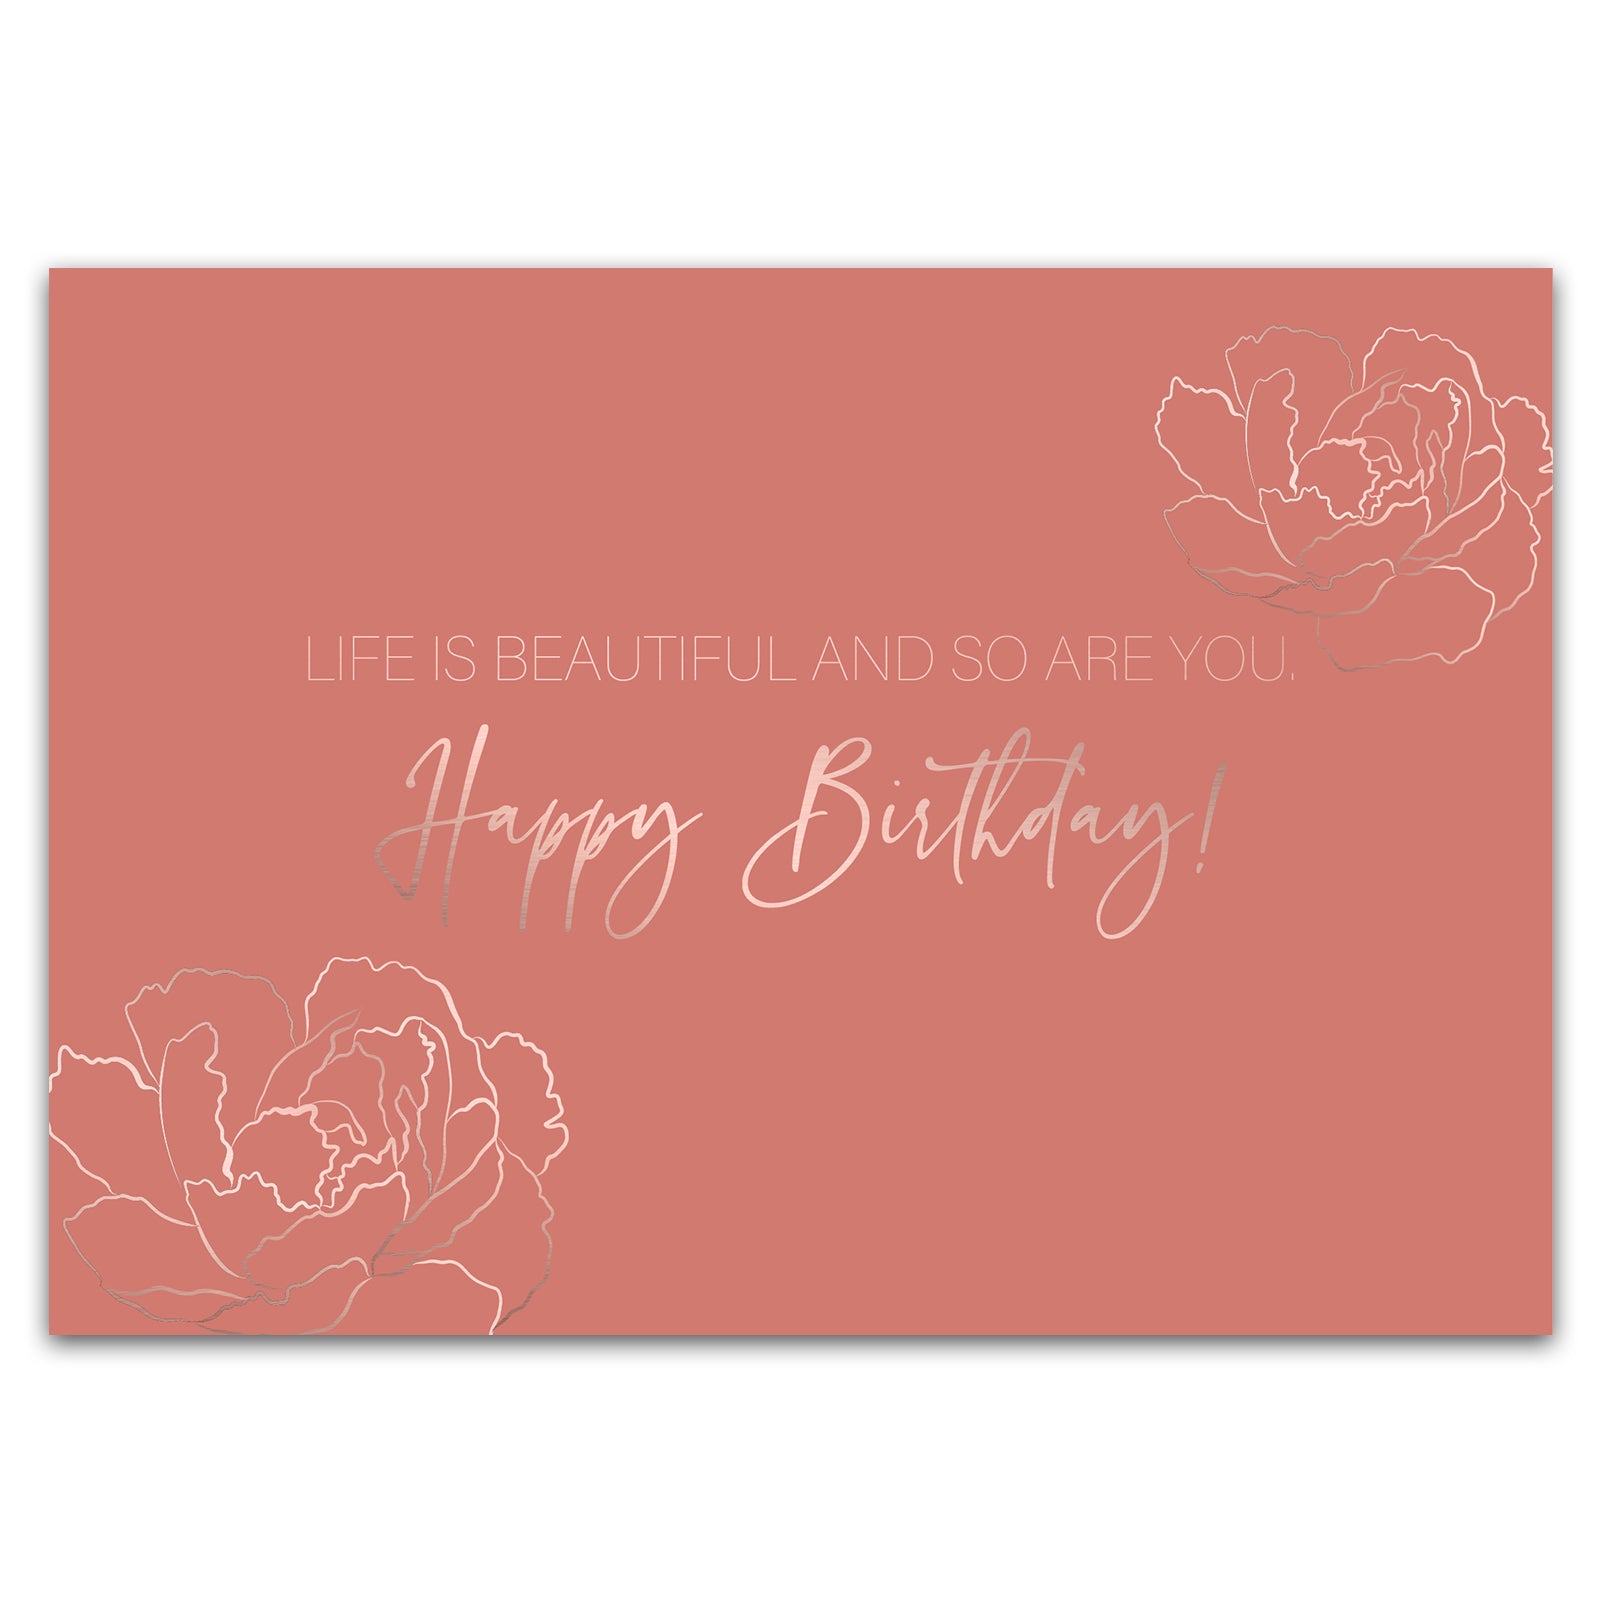 Postkarte "Life is beautiful and so are you. Happy Birthday!"